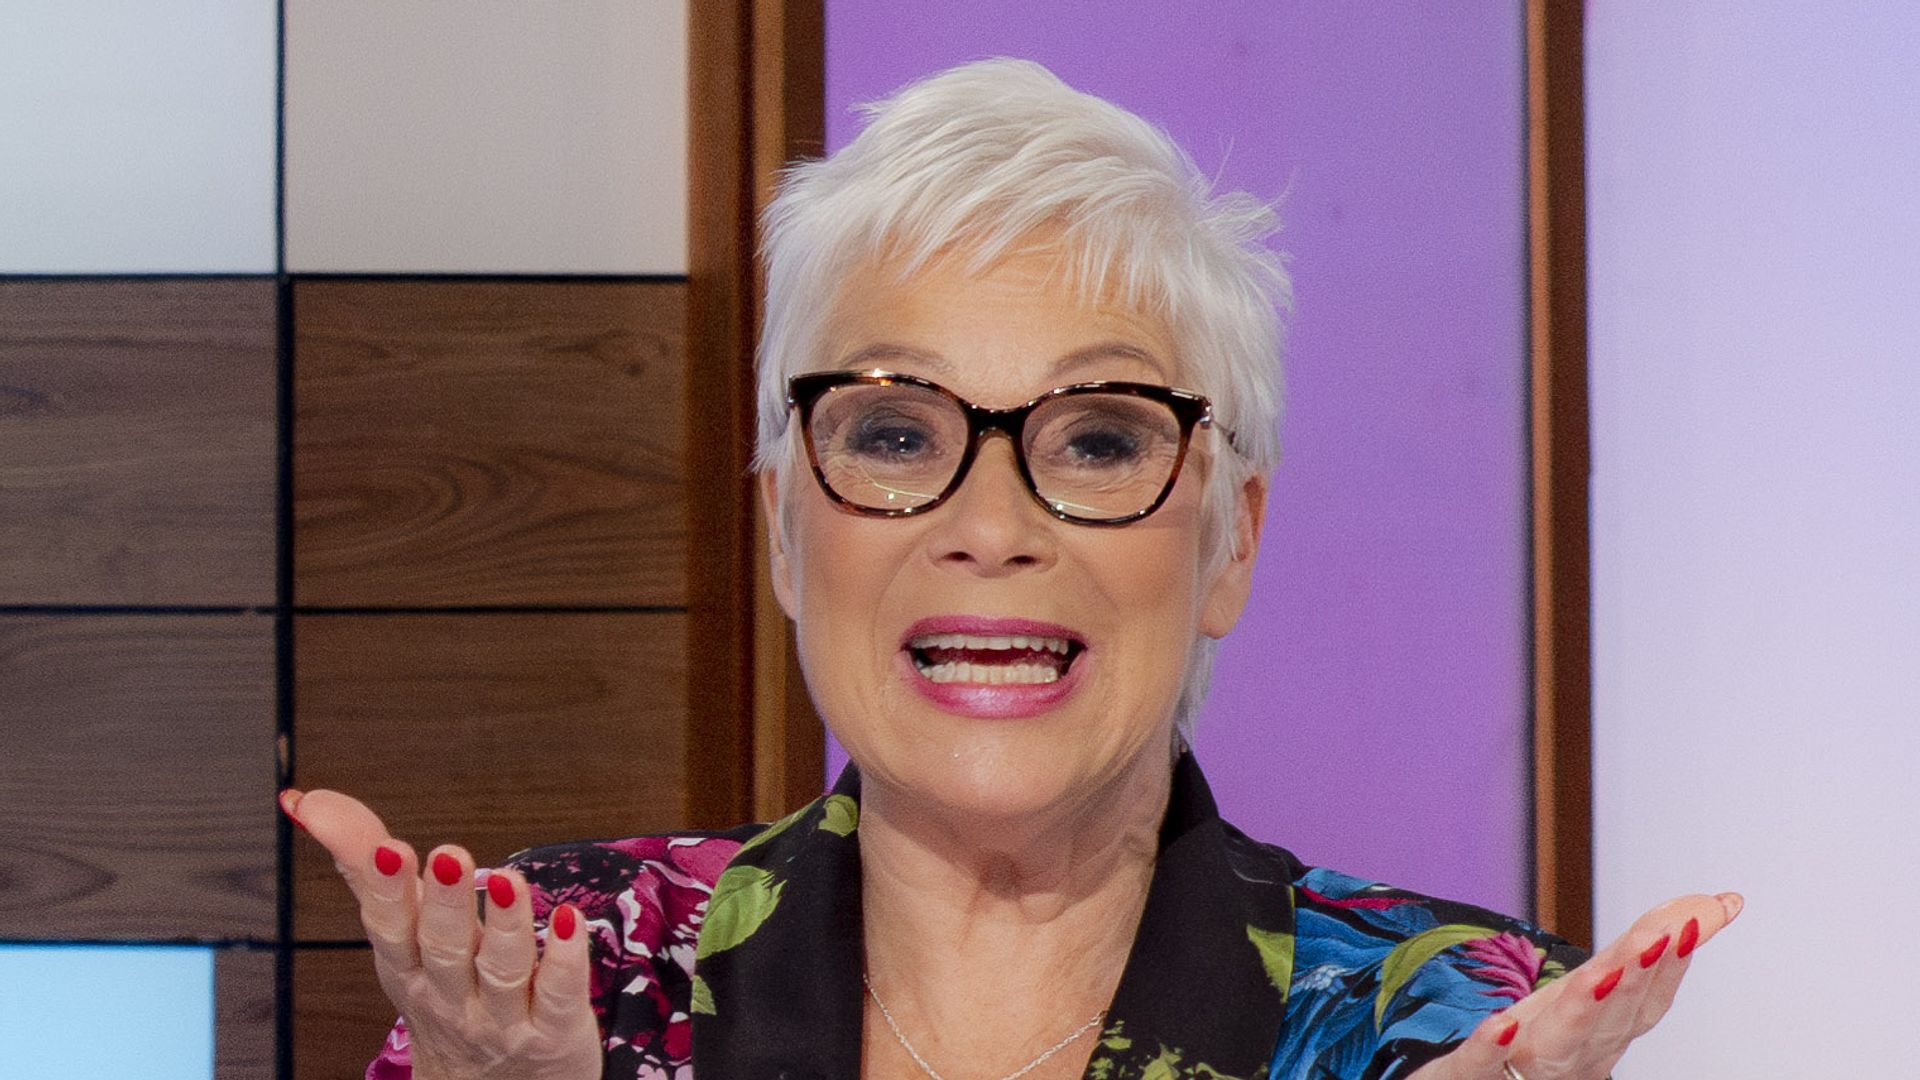 Denise Welch smiling on Loose Women